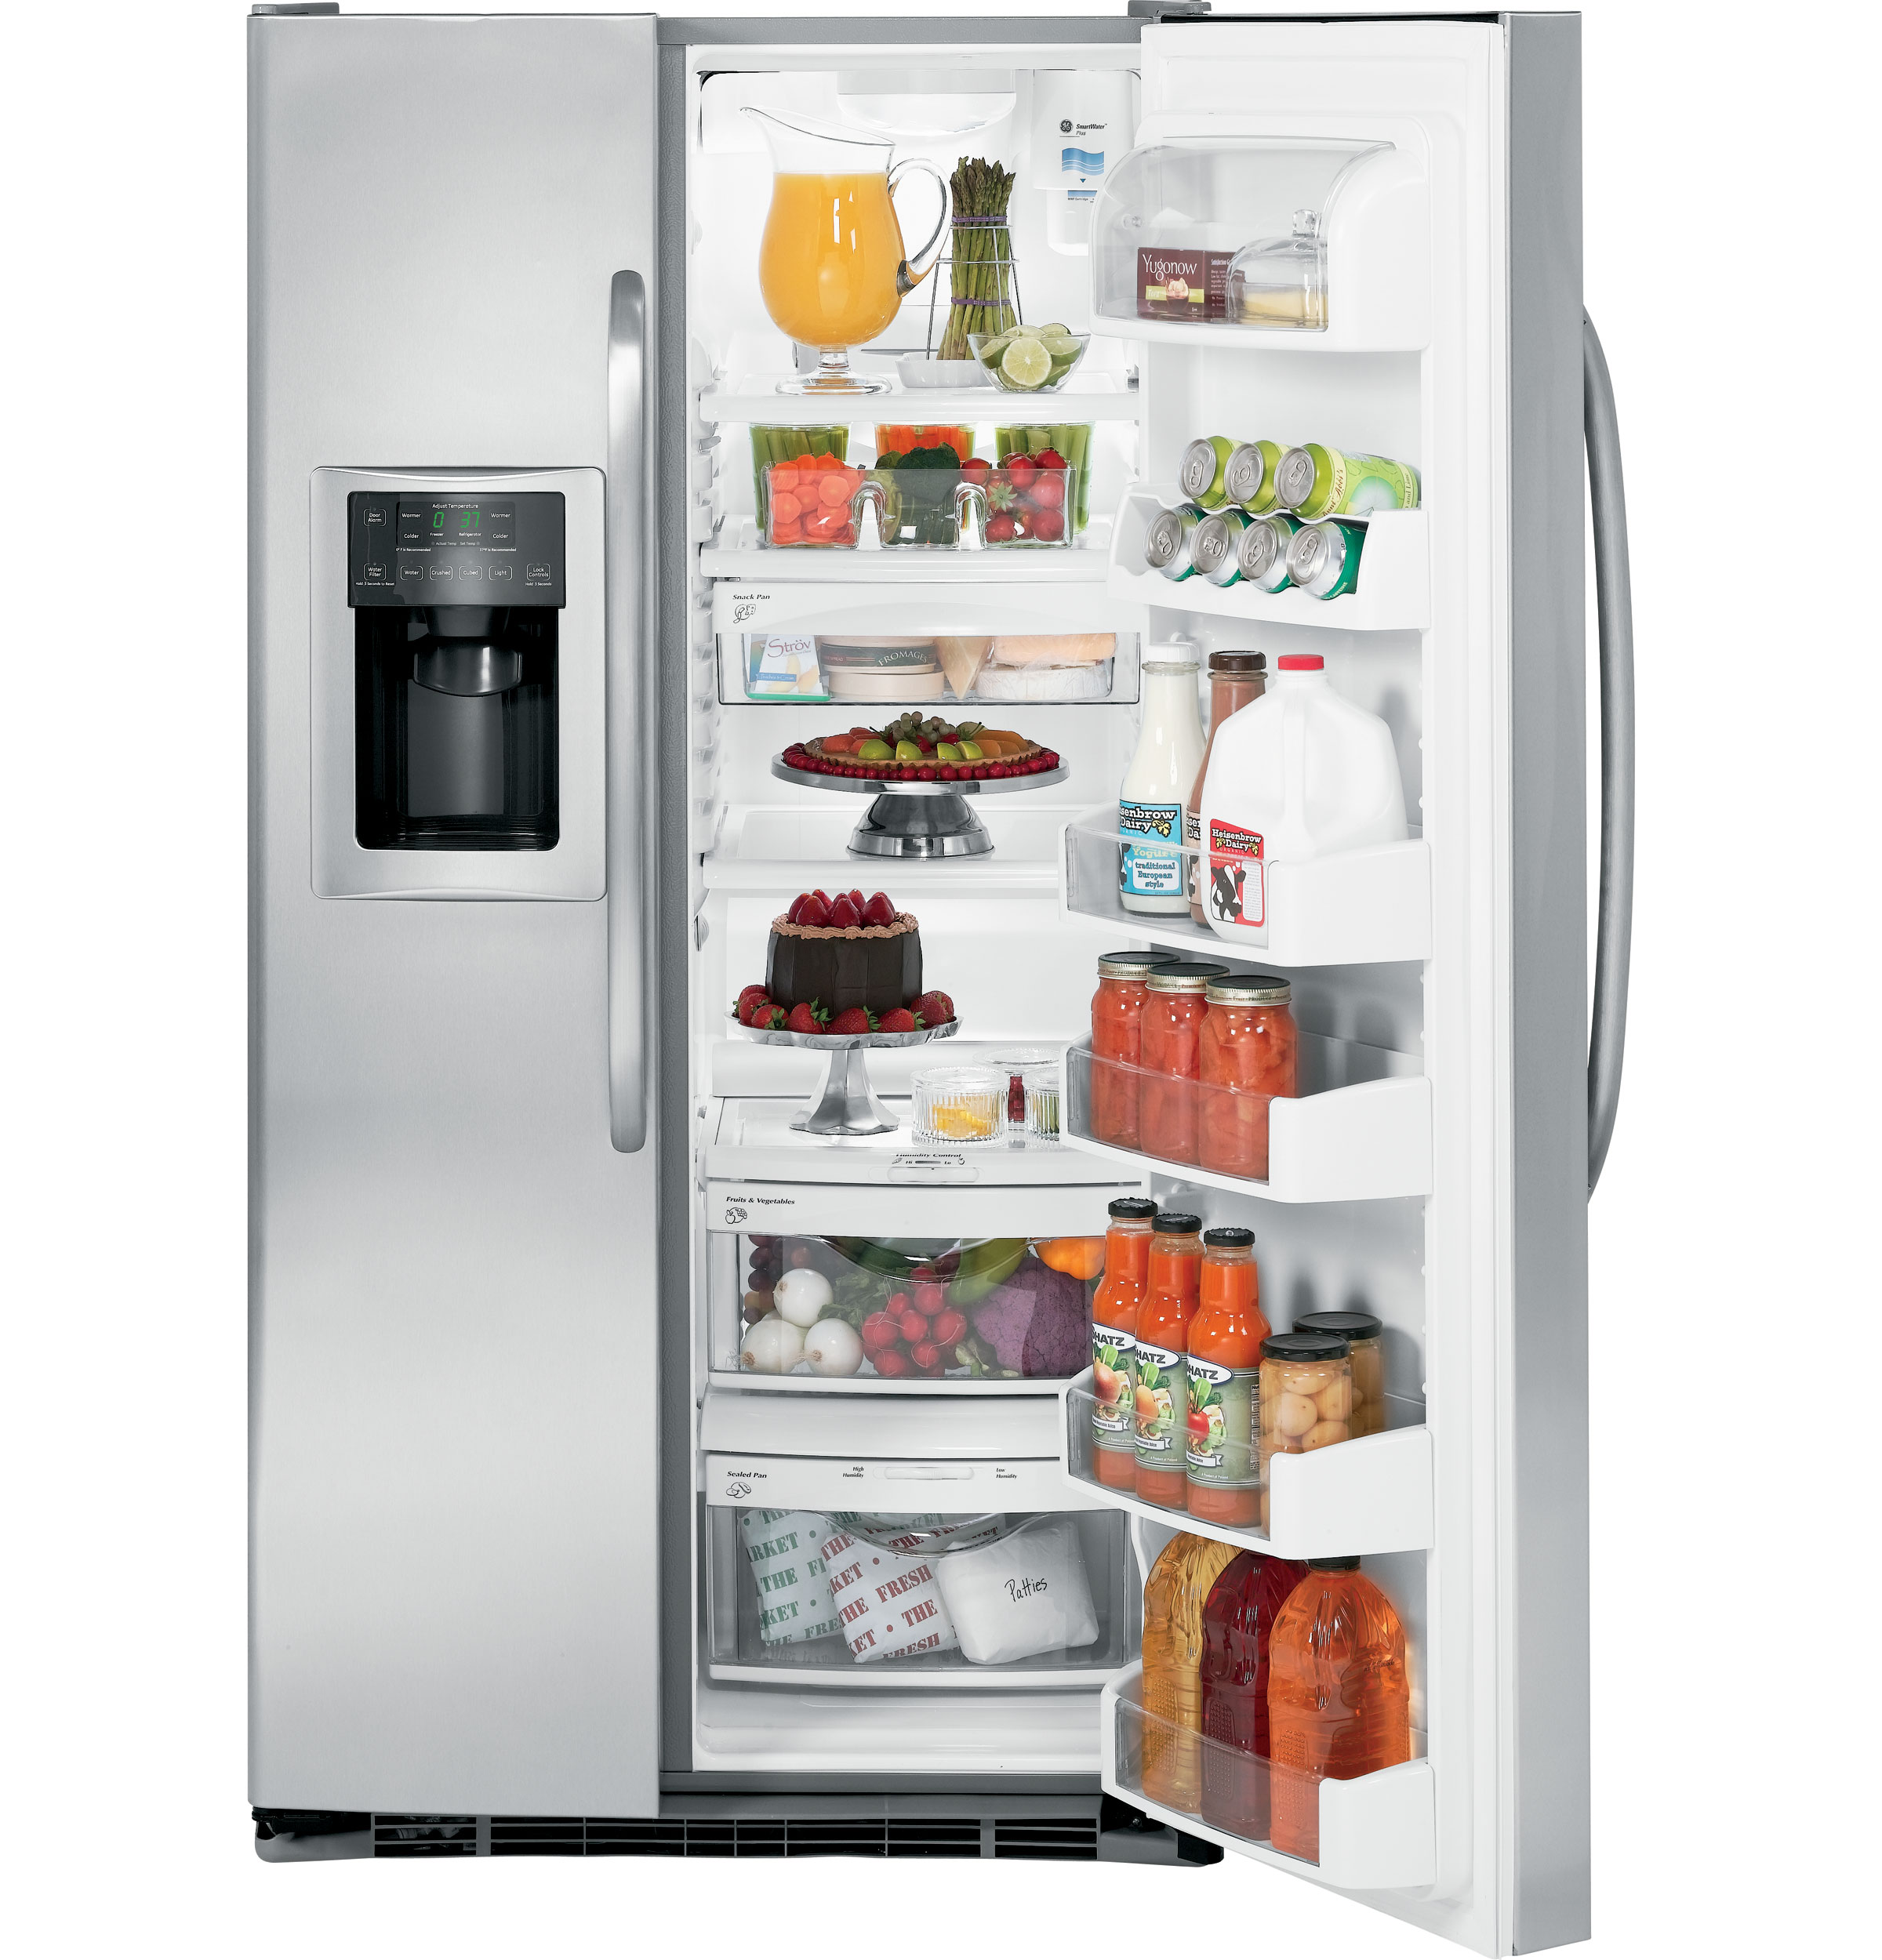 GE® ENERGY STAR® 25.4 Cu. Ft. Side-By-Side Refrigerator with Dispenser